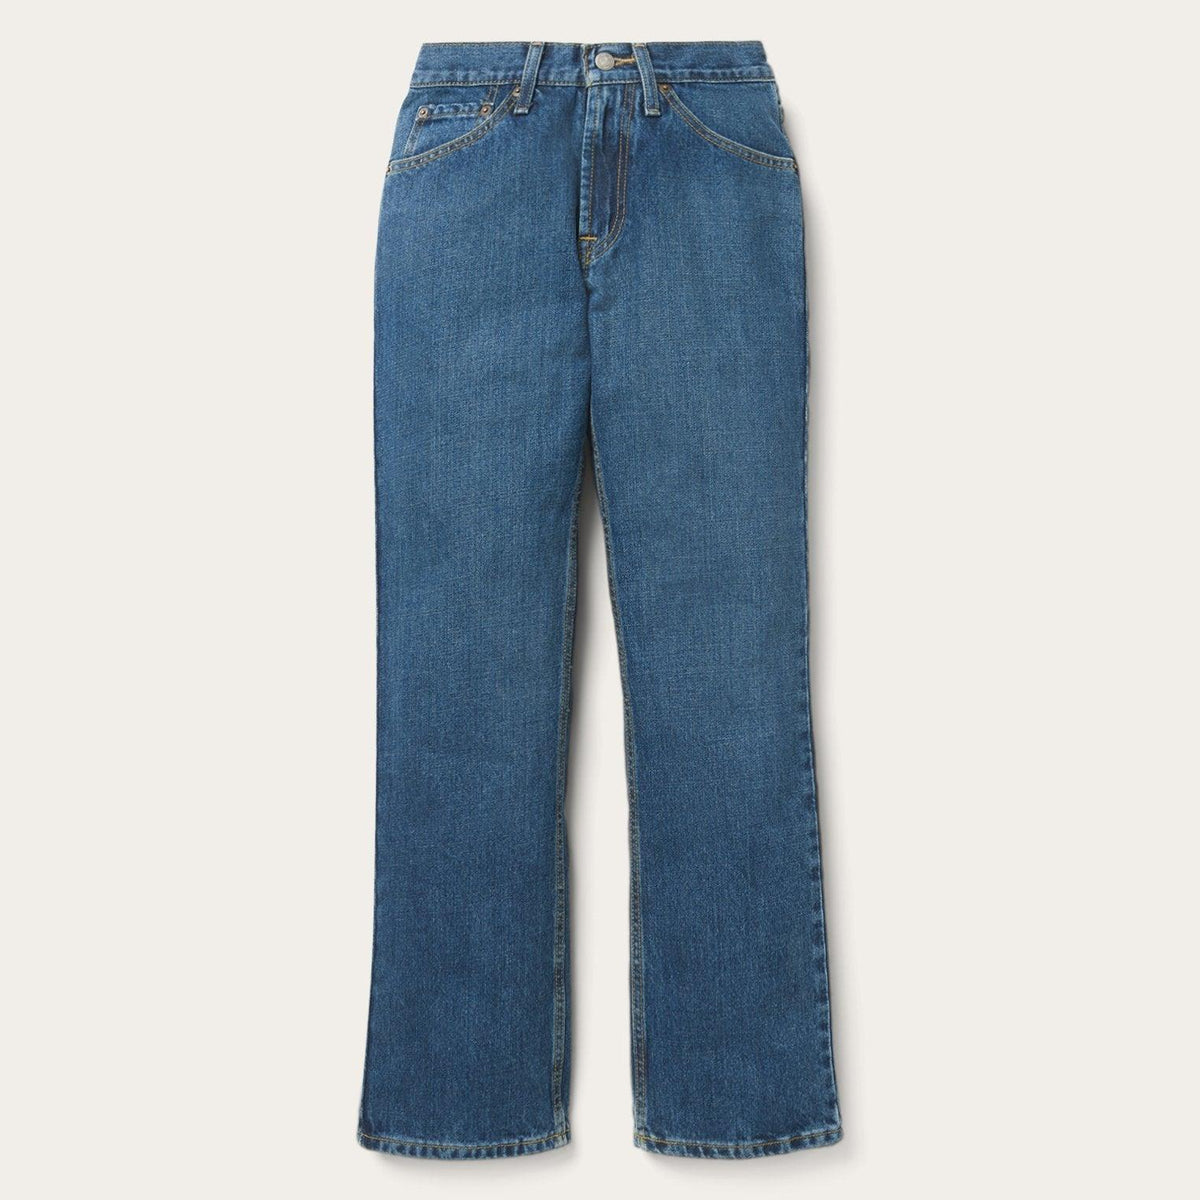 Stetson 1520 Fit Jeans In Classic Stone Wash - Flyclothing LLC